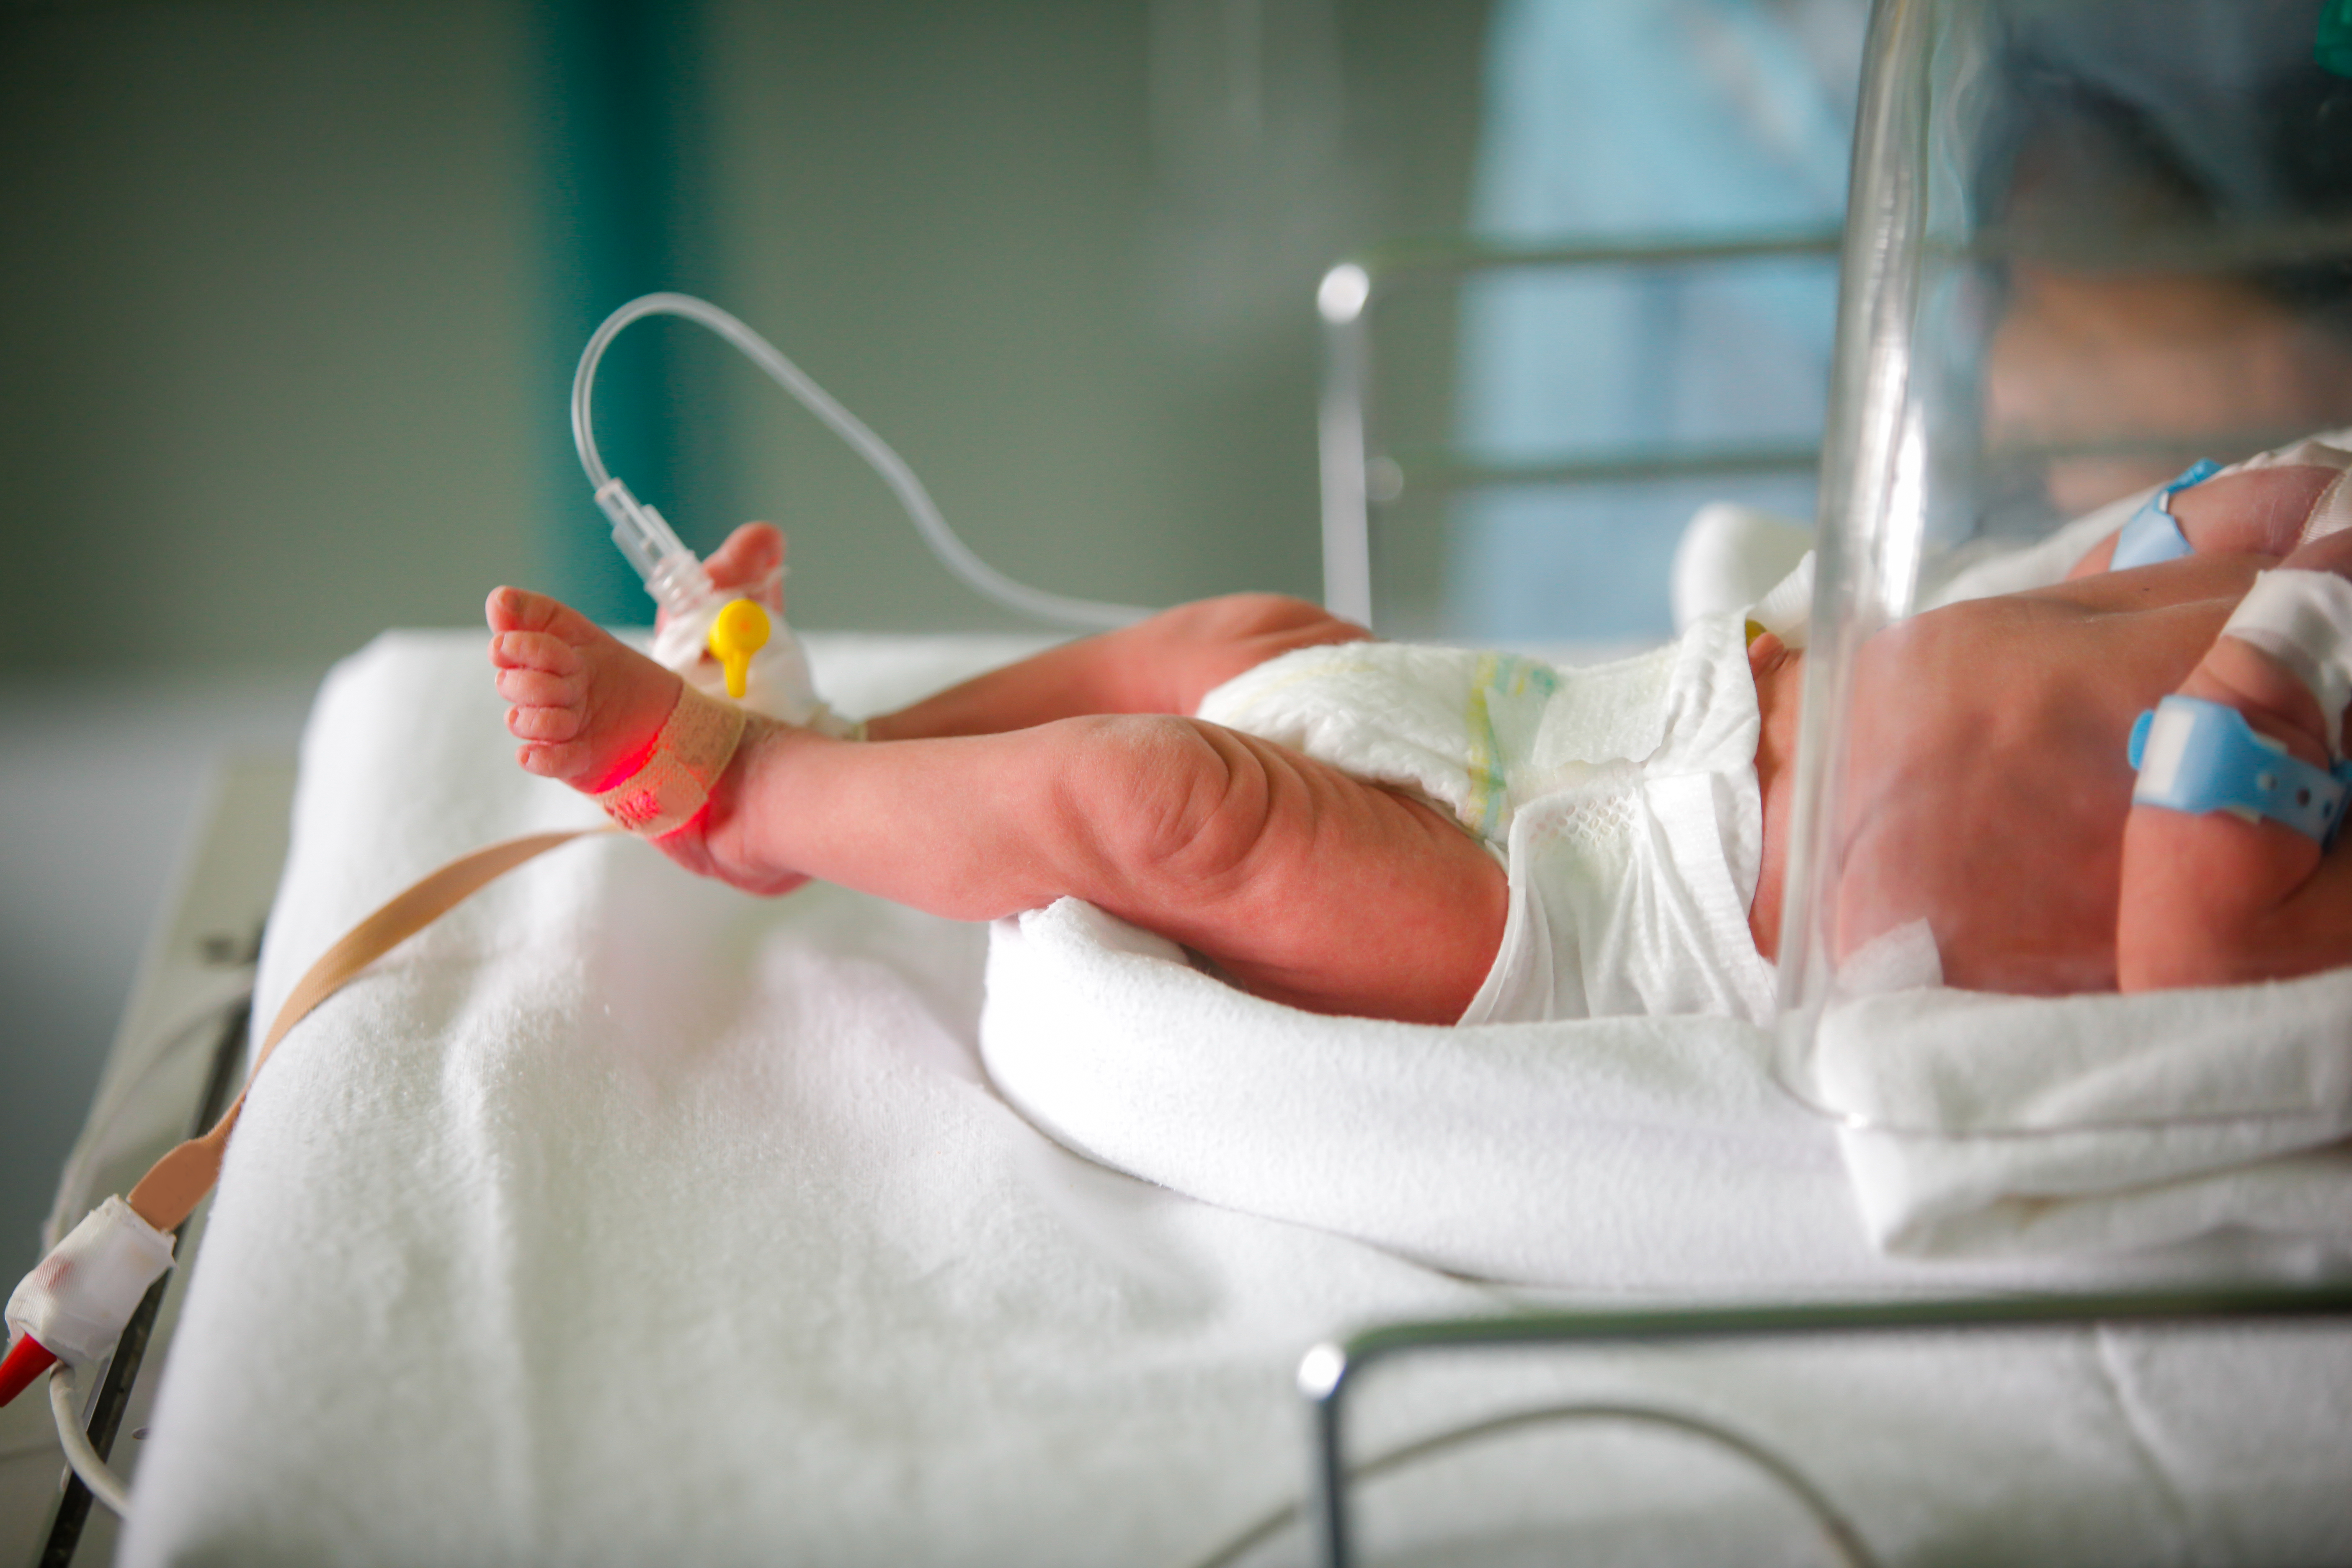 Developing Skin Safe Pulse Oximetry Devices for Neonatal Care